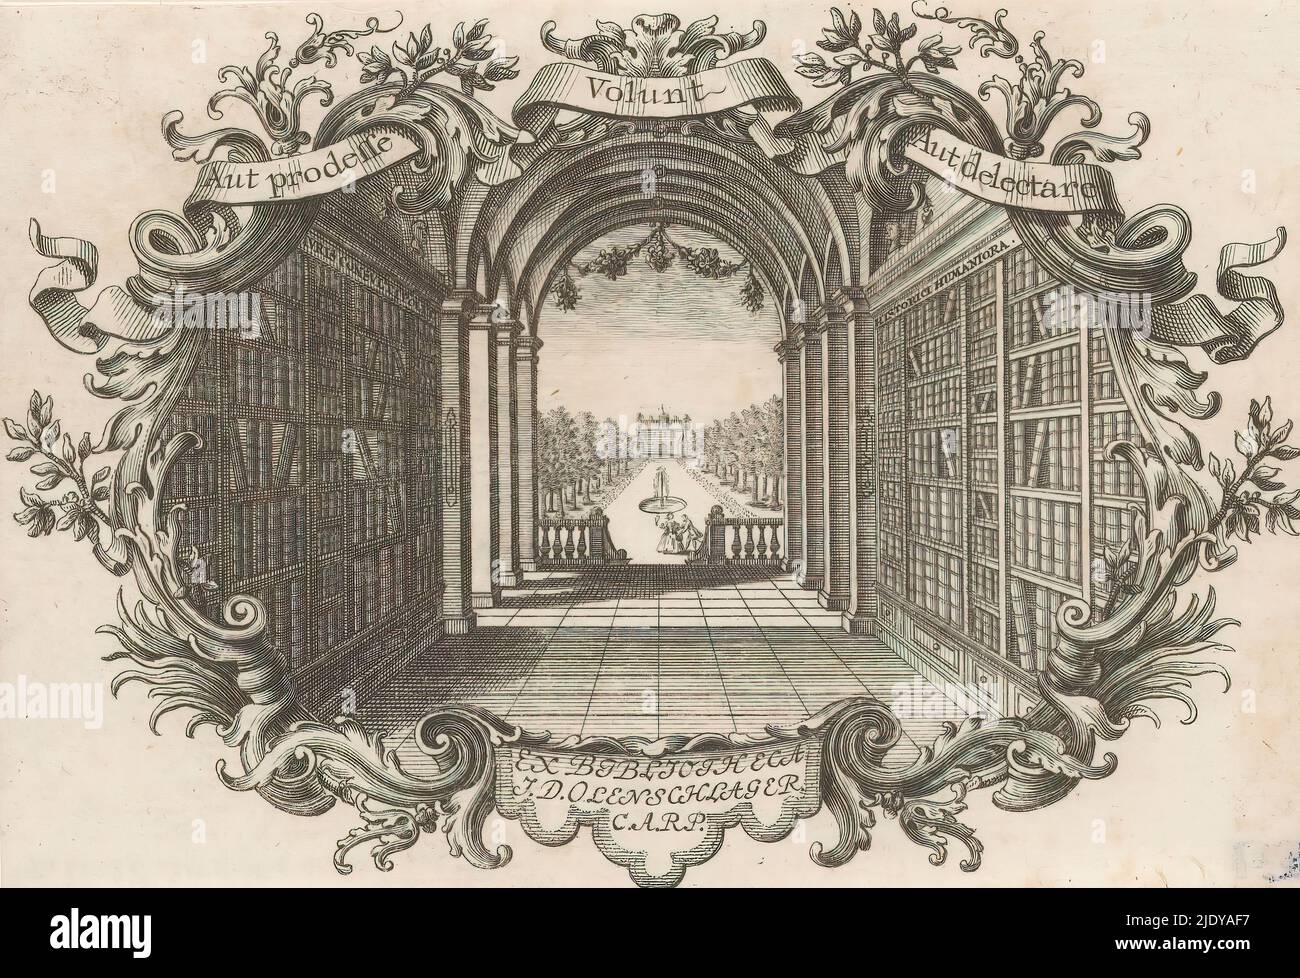 Ex libris of the jurist Johann Daniel Olenschlager, Ex Bibliotheca J.D. Olenschlager C.A.R.P. (title on object), Gallery with bookcases on both sides. At the end a view through to a garden with a fountain. Framed with the motto: 'Aut prodesse volunt aut delectare'., print maker: anonymous, 1737 - 1778, paper, etching, engraving, height 88 mm × width 128 mm Stock Photo